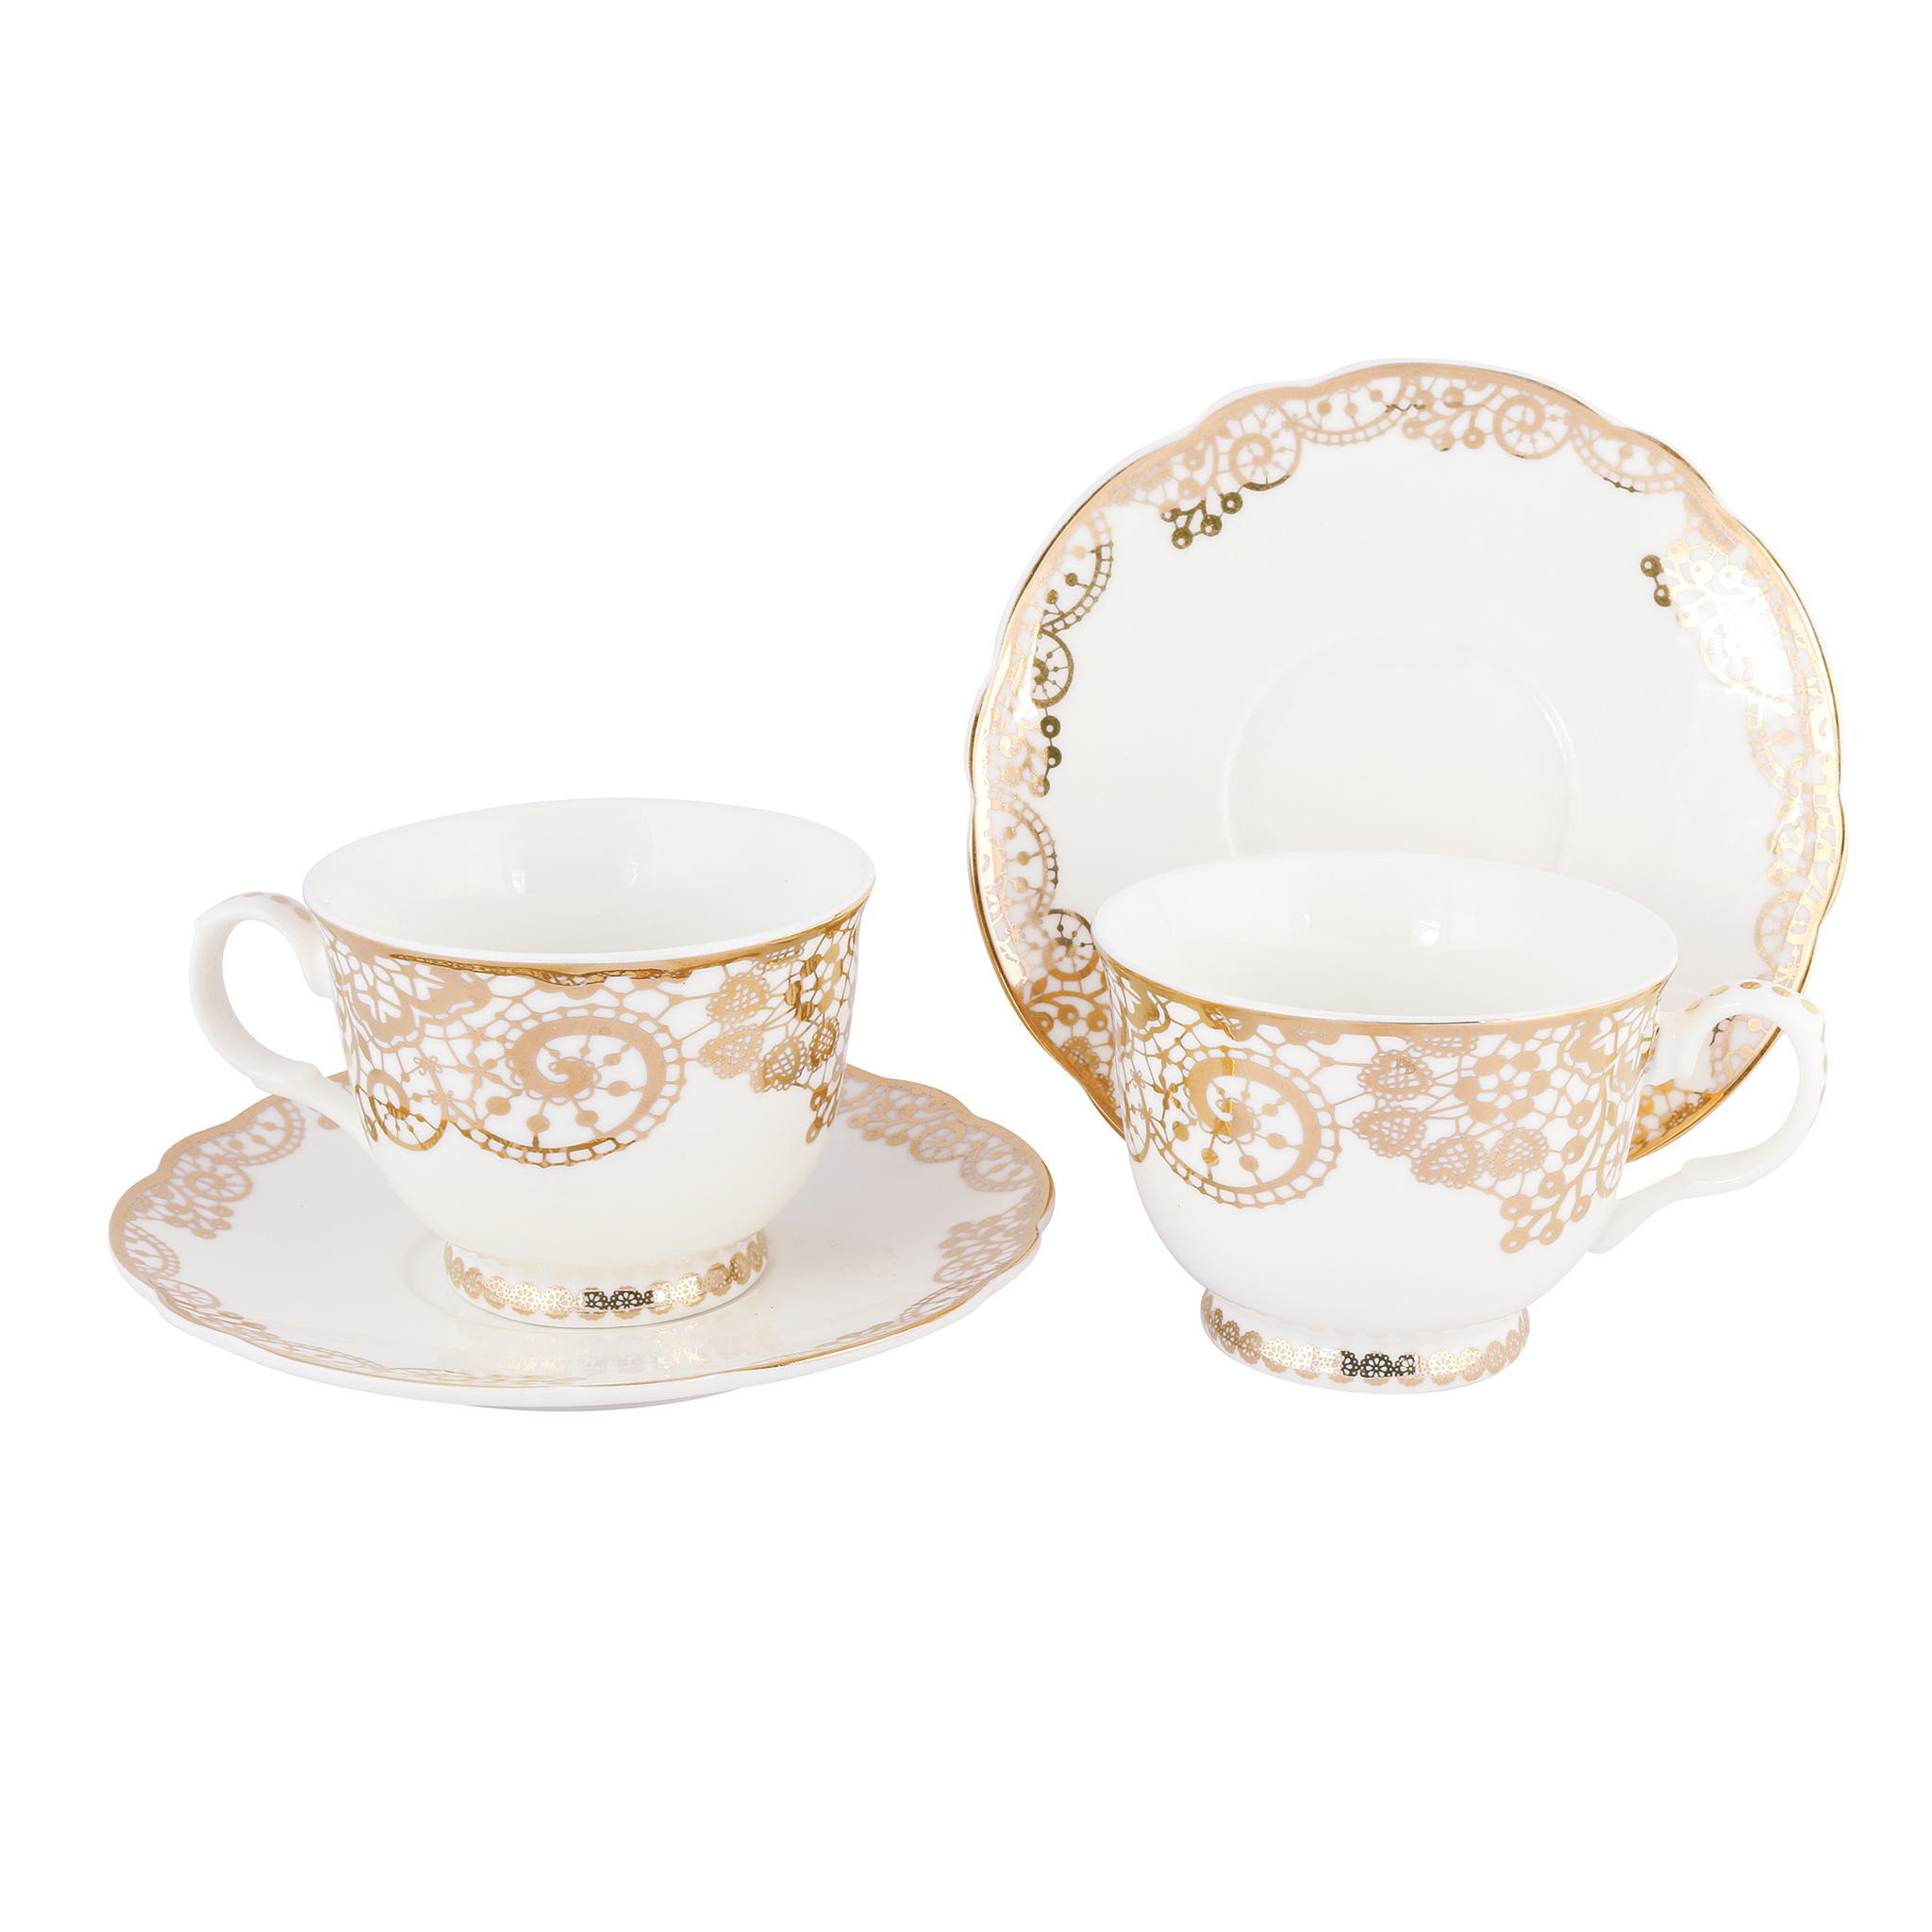 Gold Lace Cup and Saucer Set